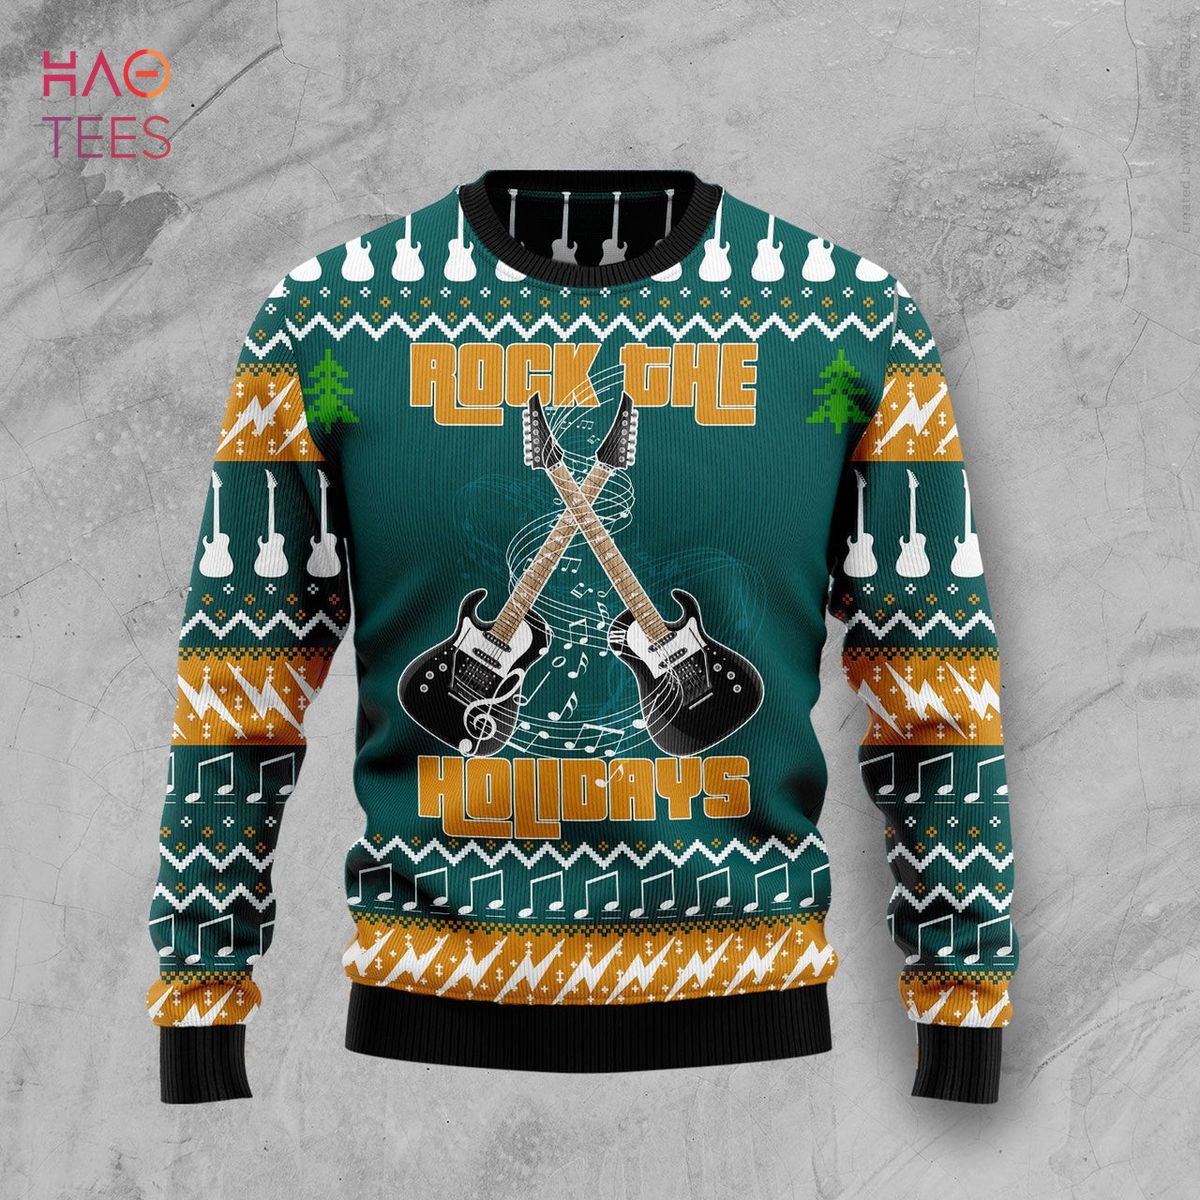 Guitar Rock The Holiday Xmas Ugly Christmas Sweater